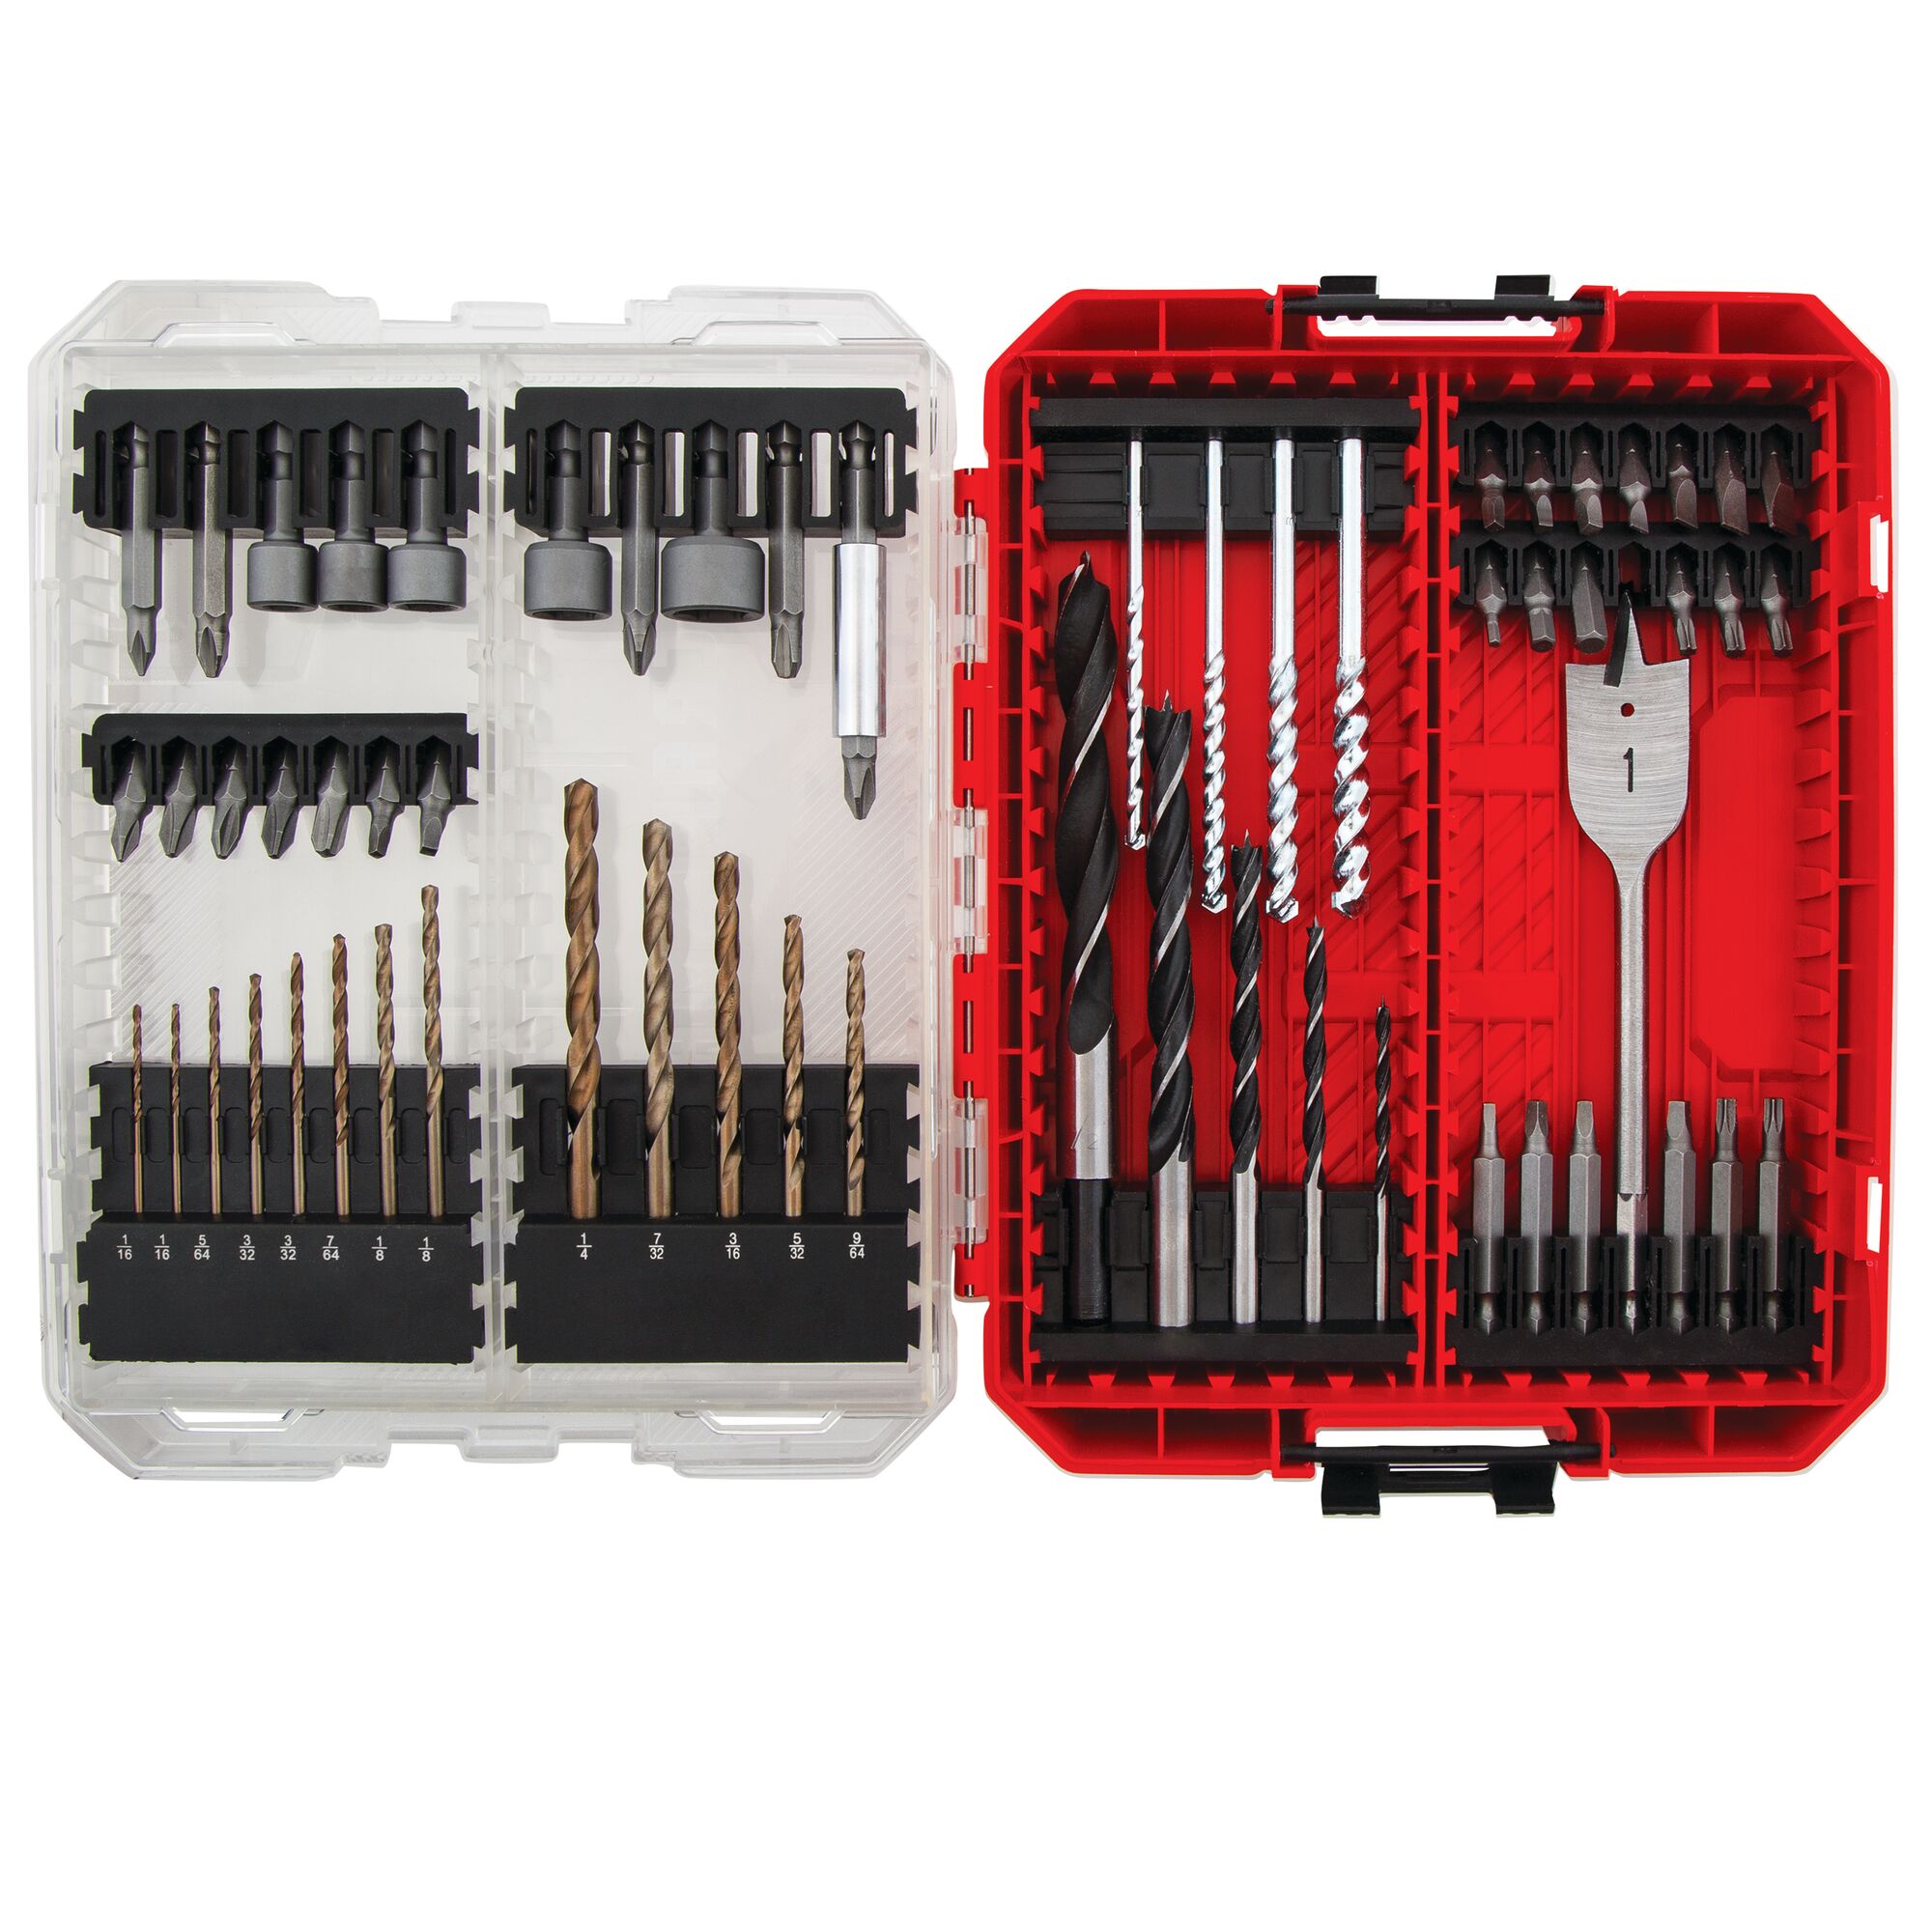 60 Piece DRILL or DRIVE SET in plastic case packaging with lid open.